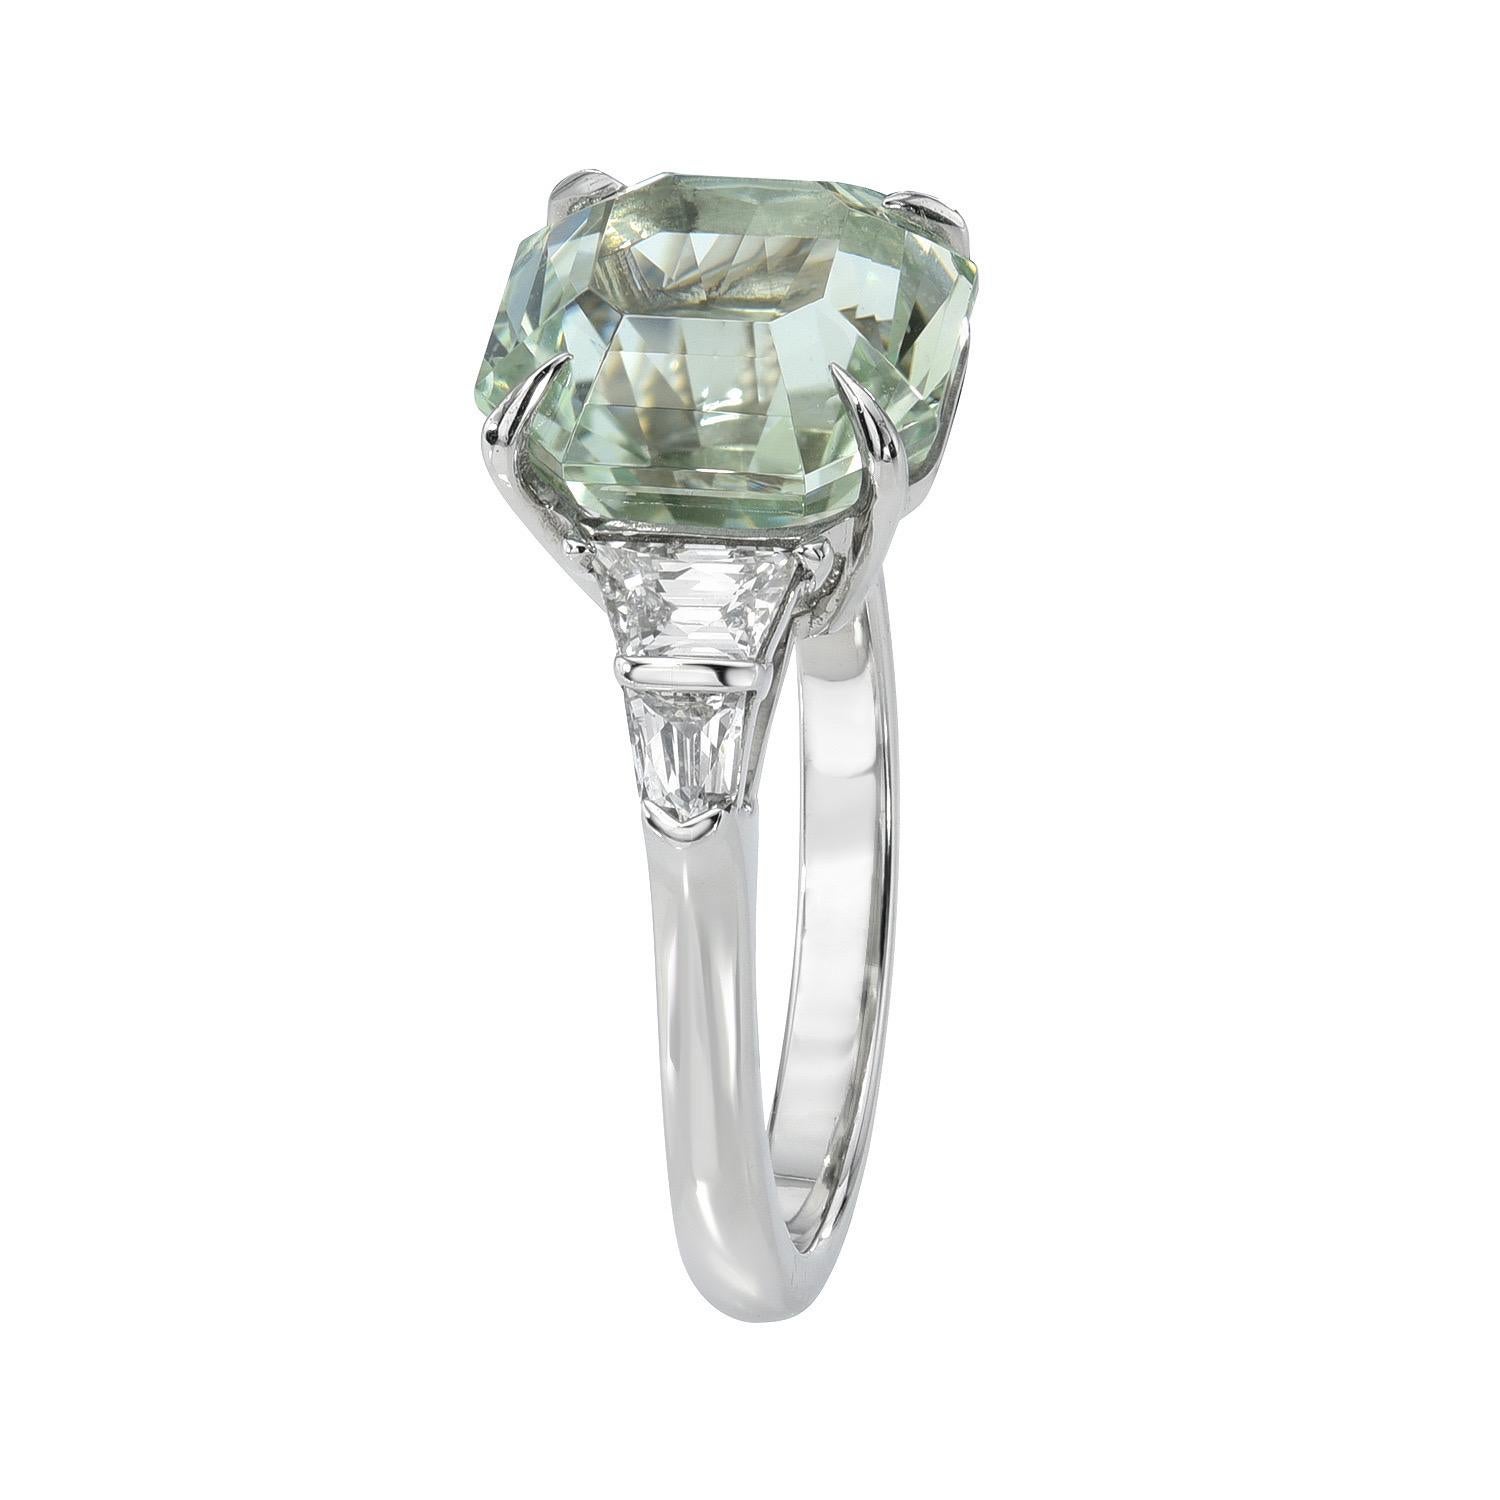 Green Beryl Ring 4.96 Carat Square Radiant Cut Natural For Sale 1